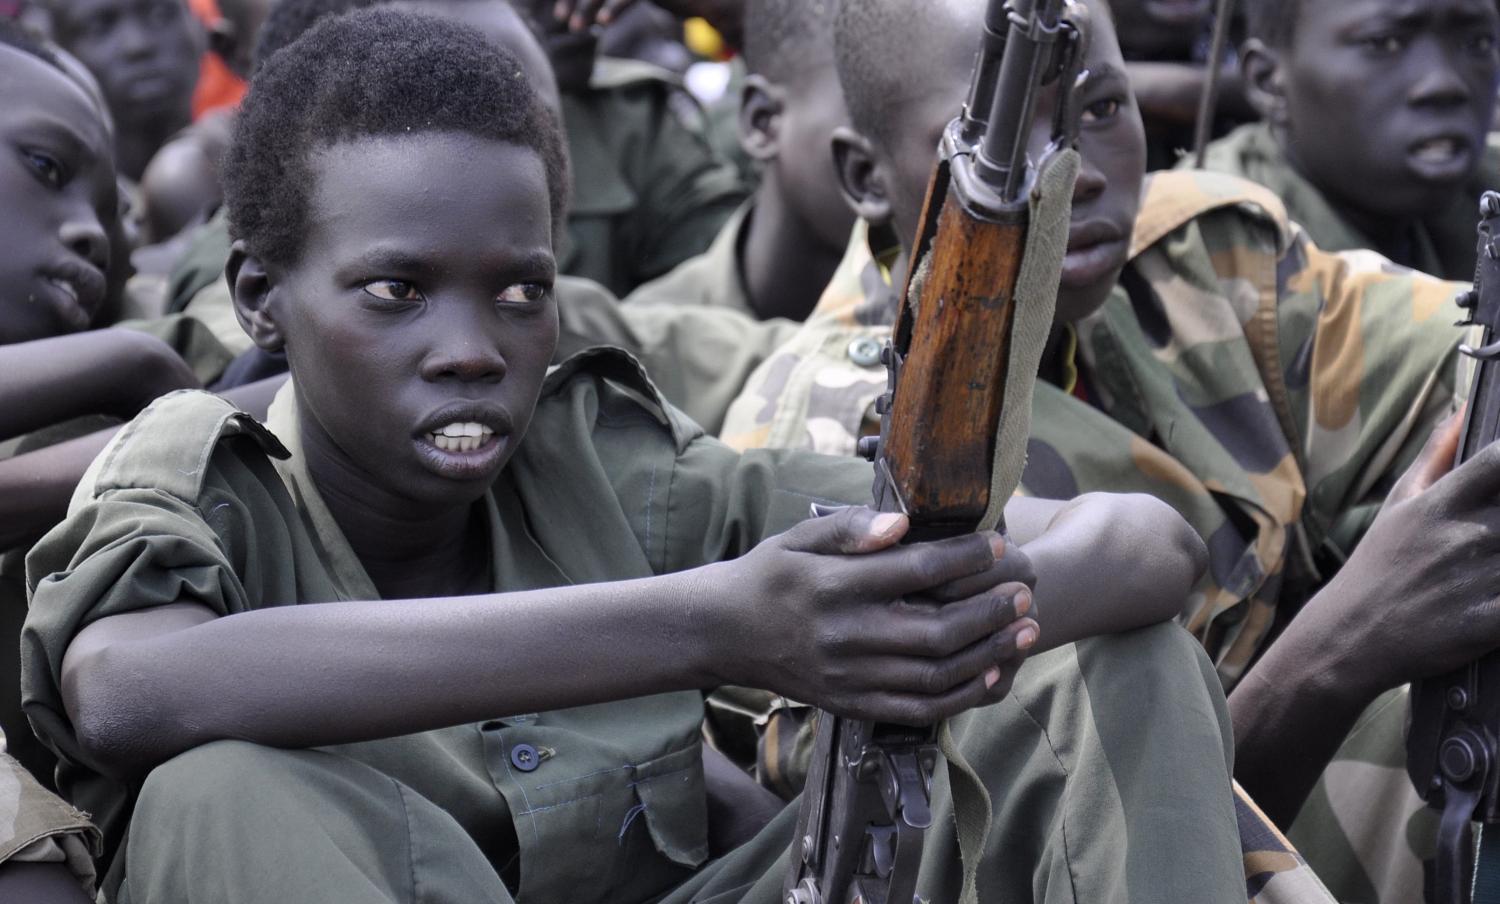 Child soldiers released in South Sudan, 2015 (Photo: Samir Bol/Getty)